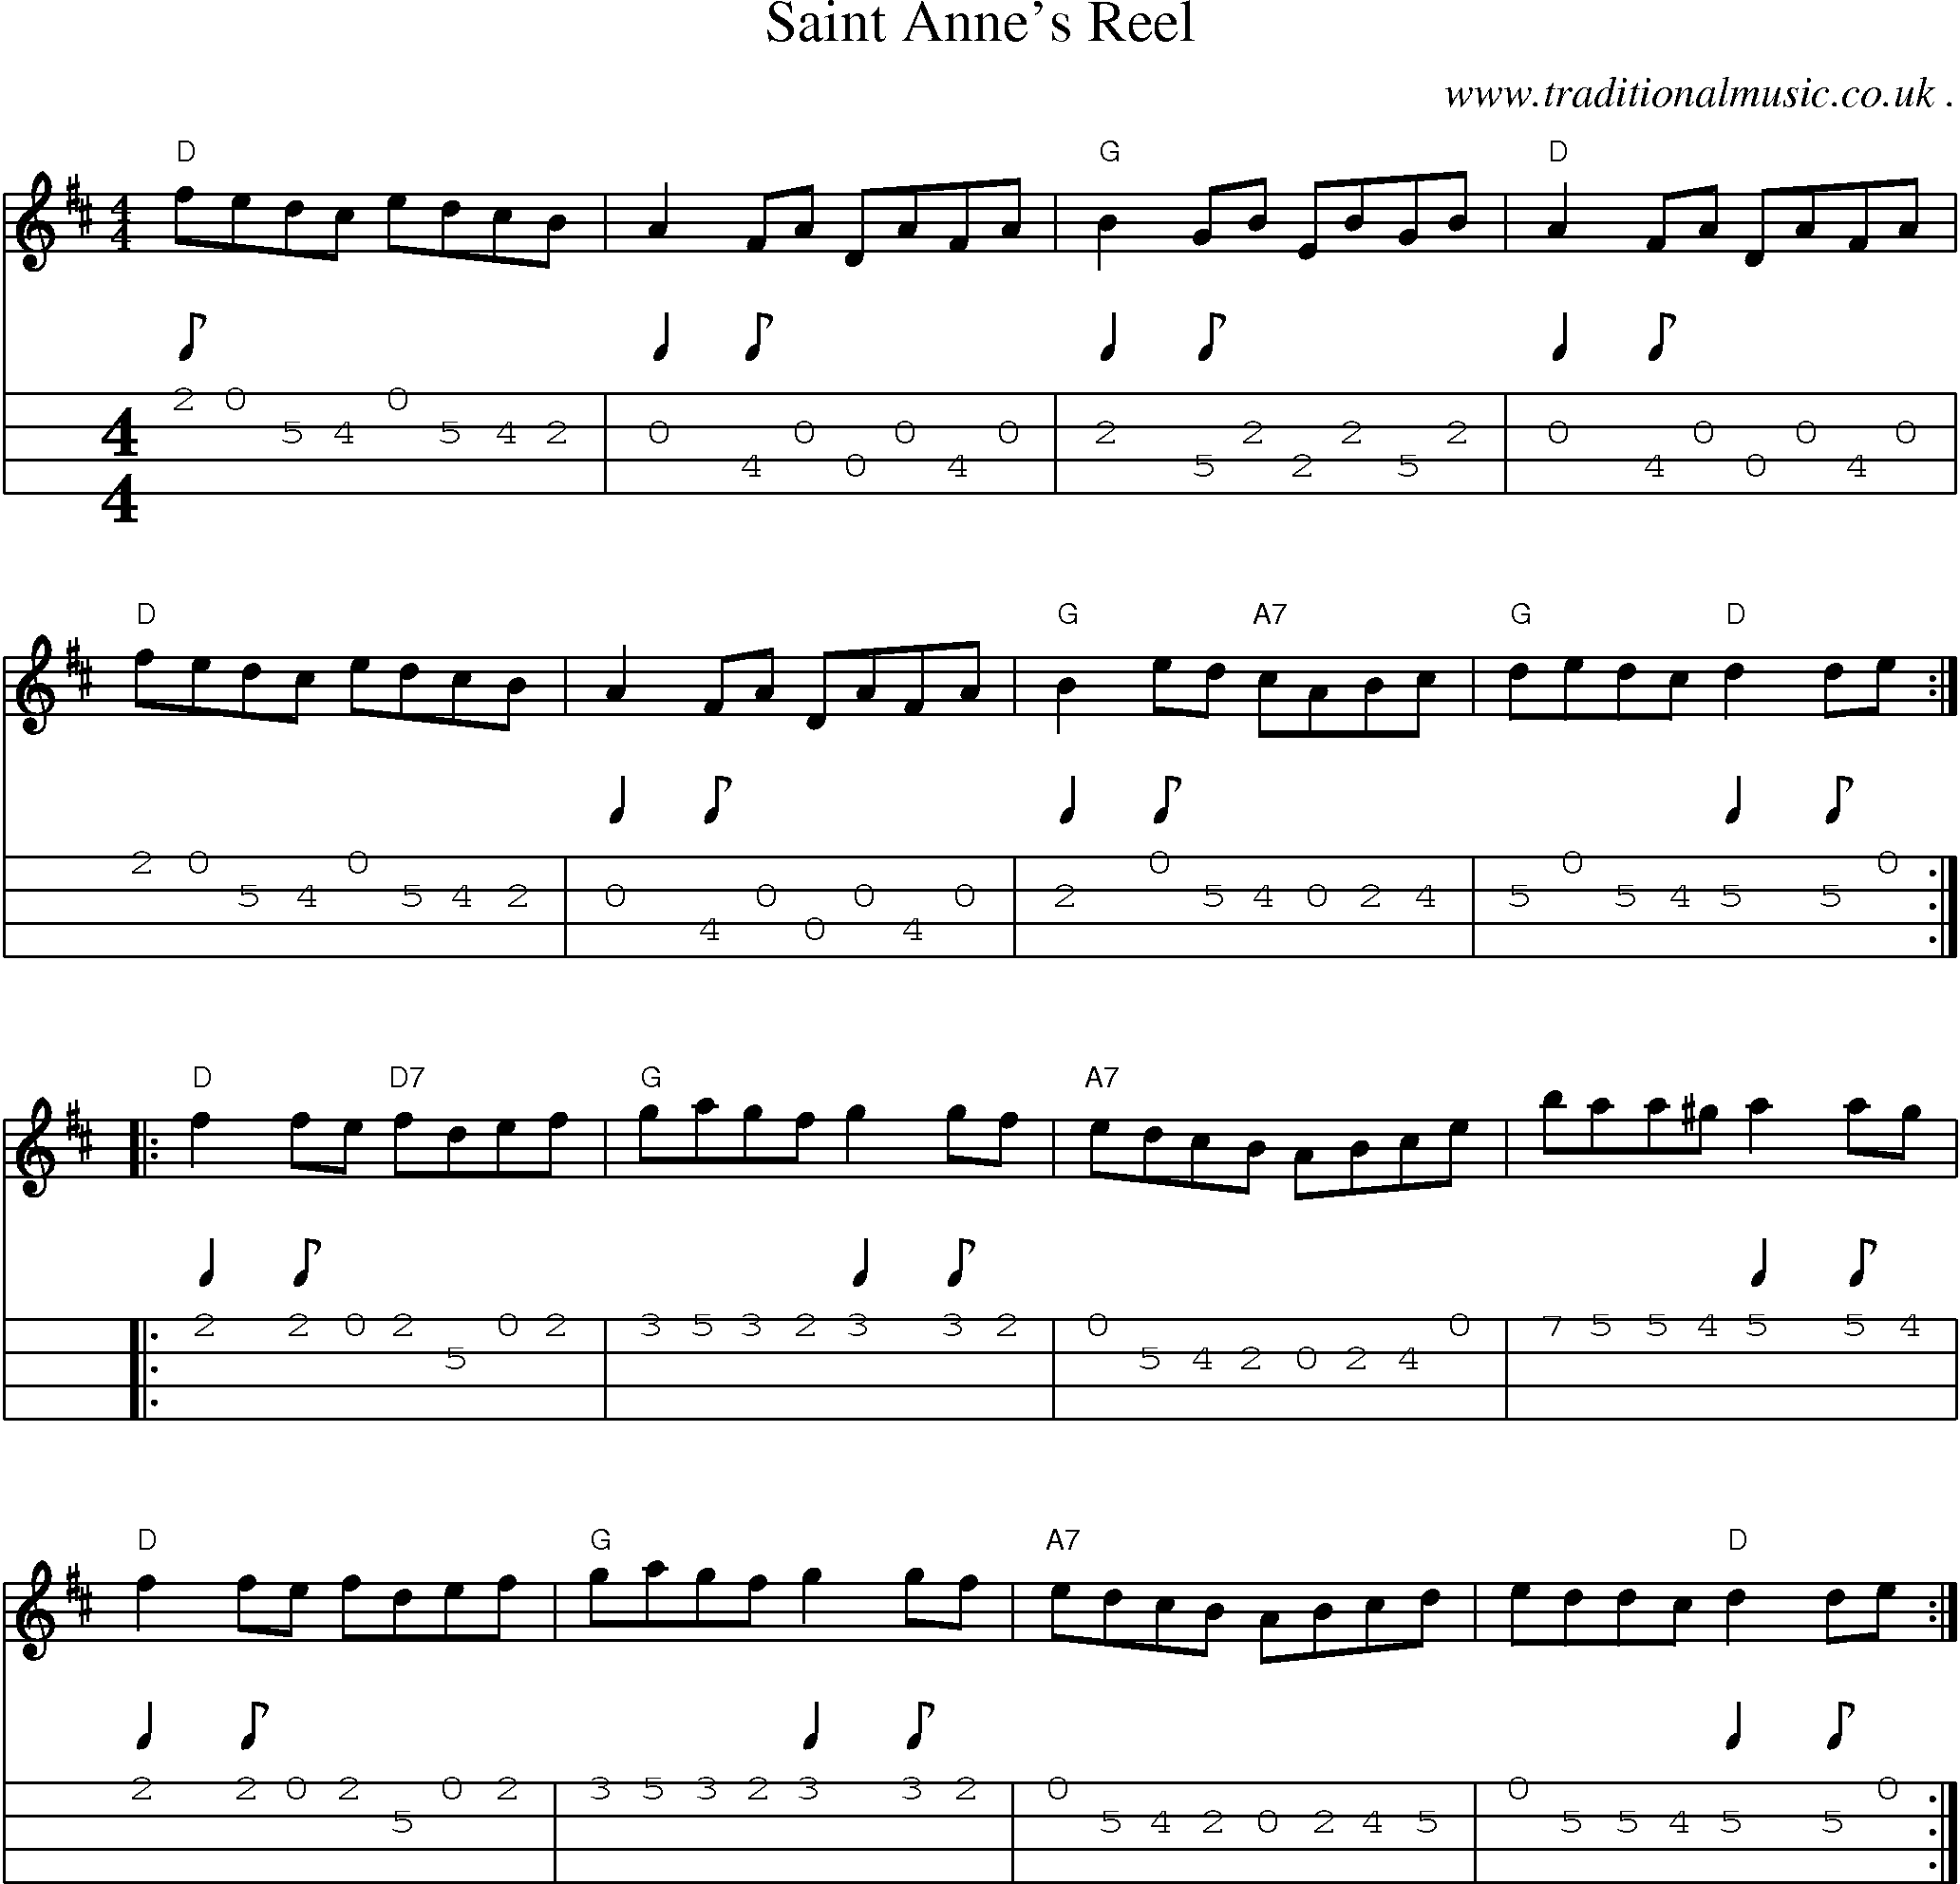 Music Score and Guitar Tabs for Saint Annes Reel1